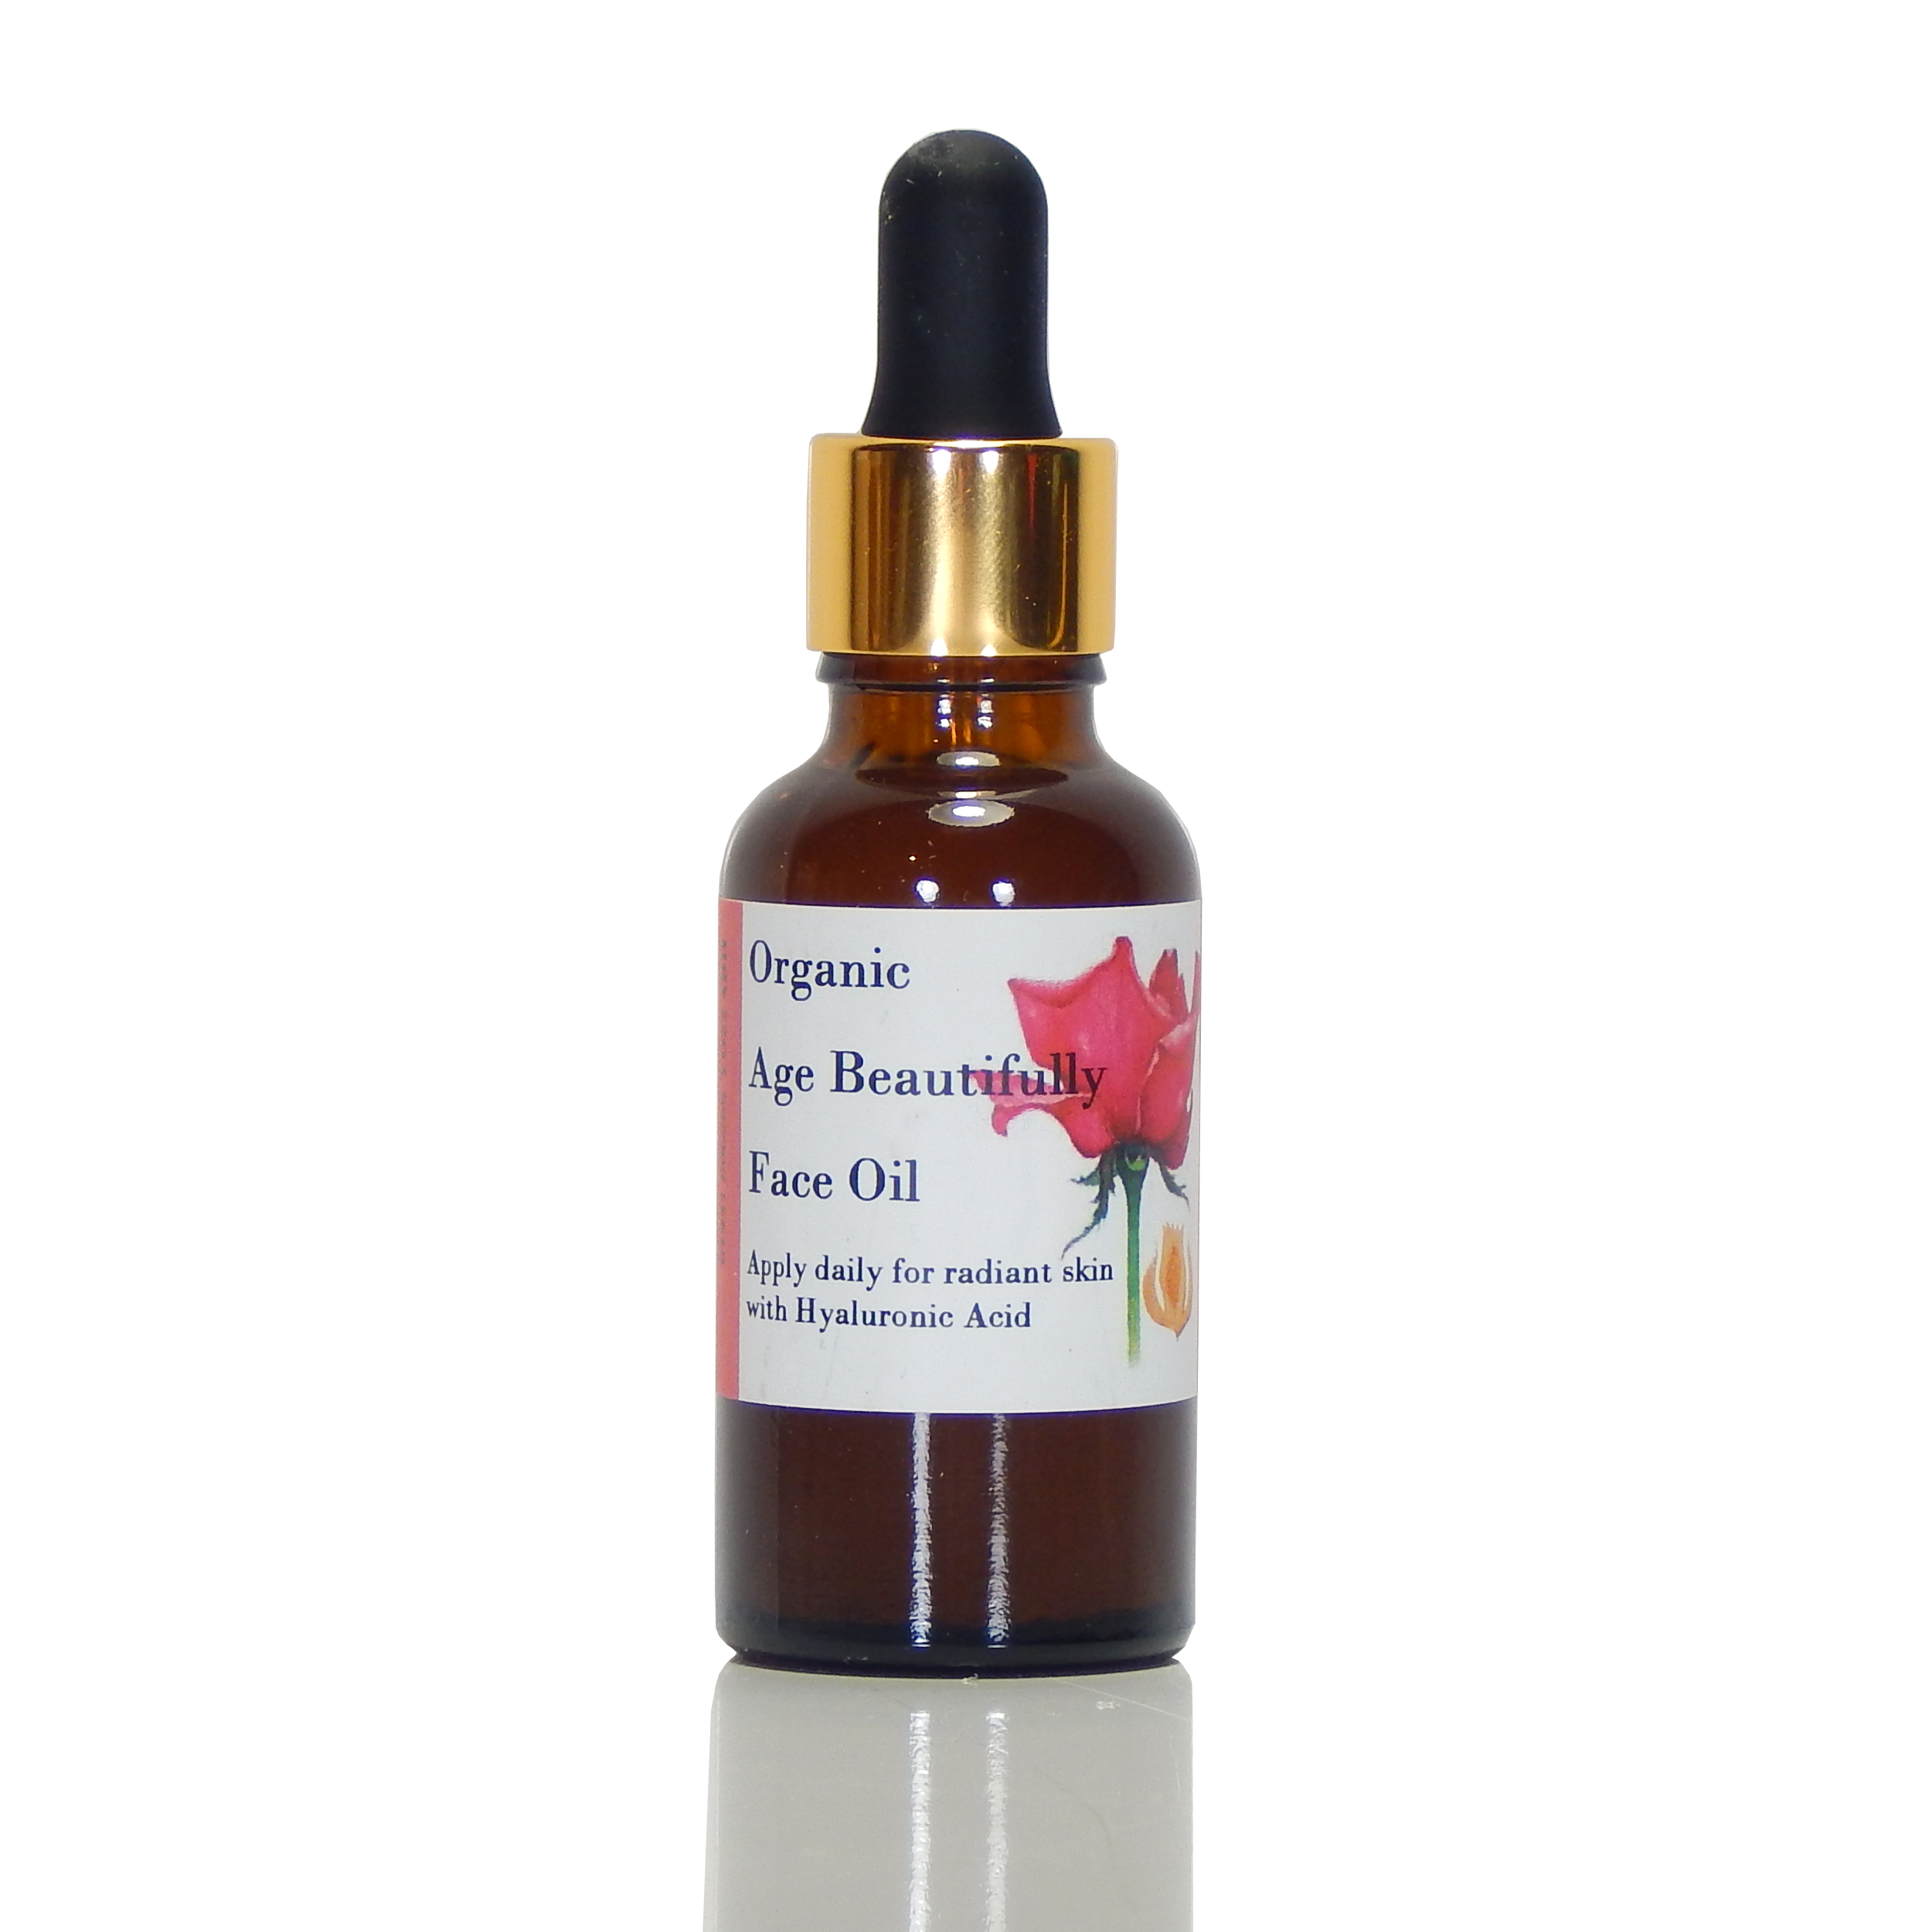 Organic Age Beautifully Face Oil with hyaluronic acid